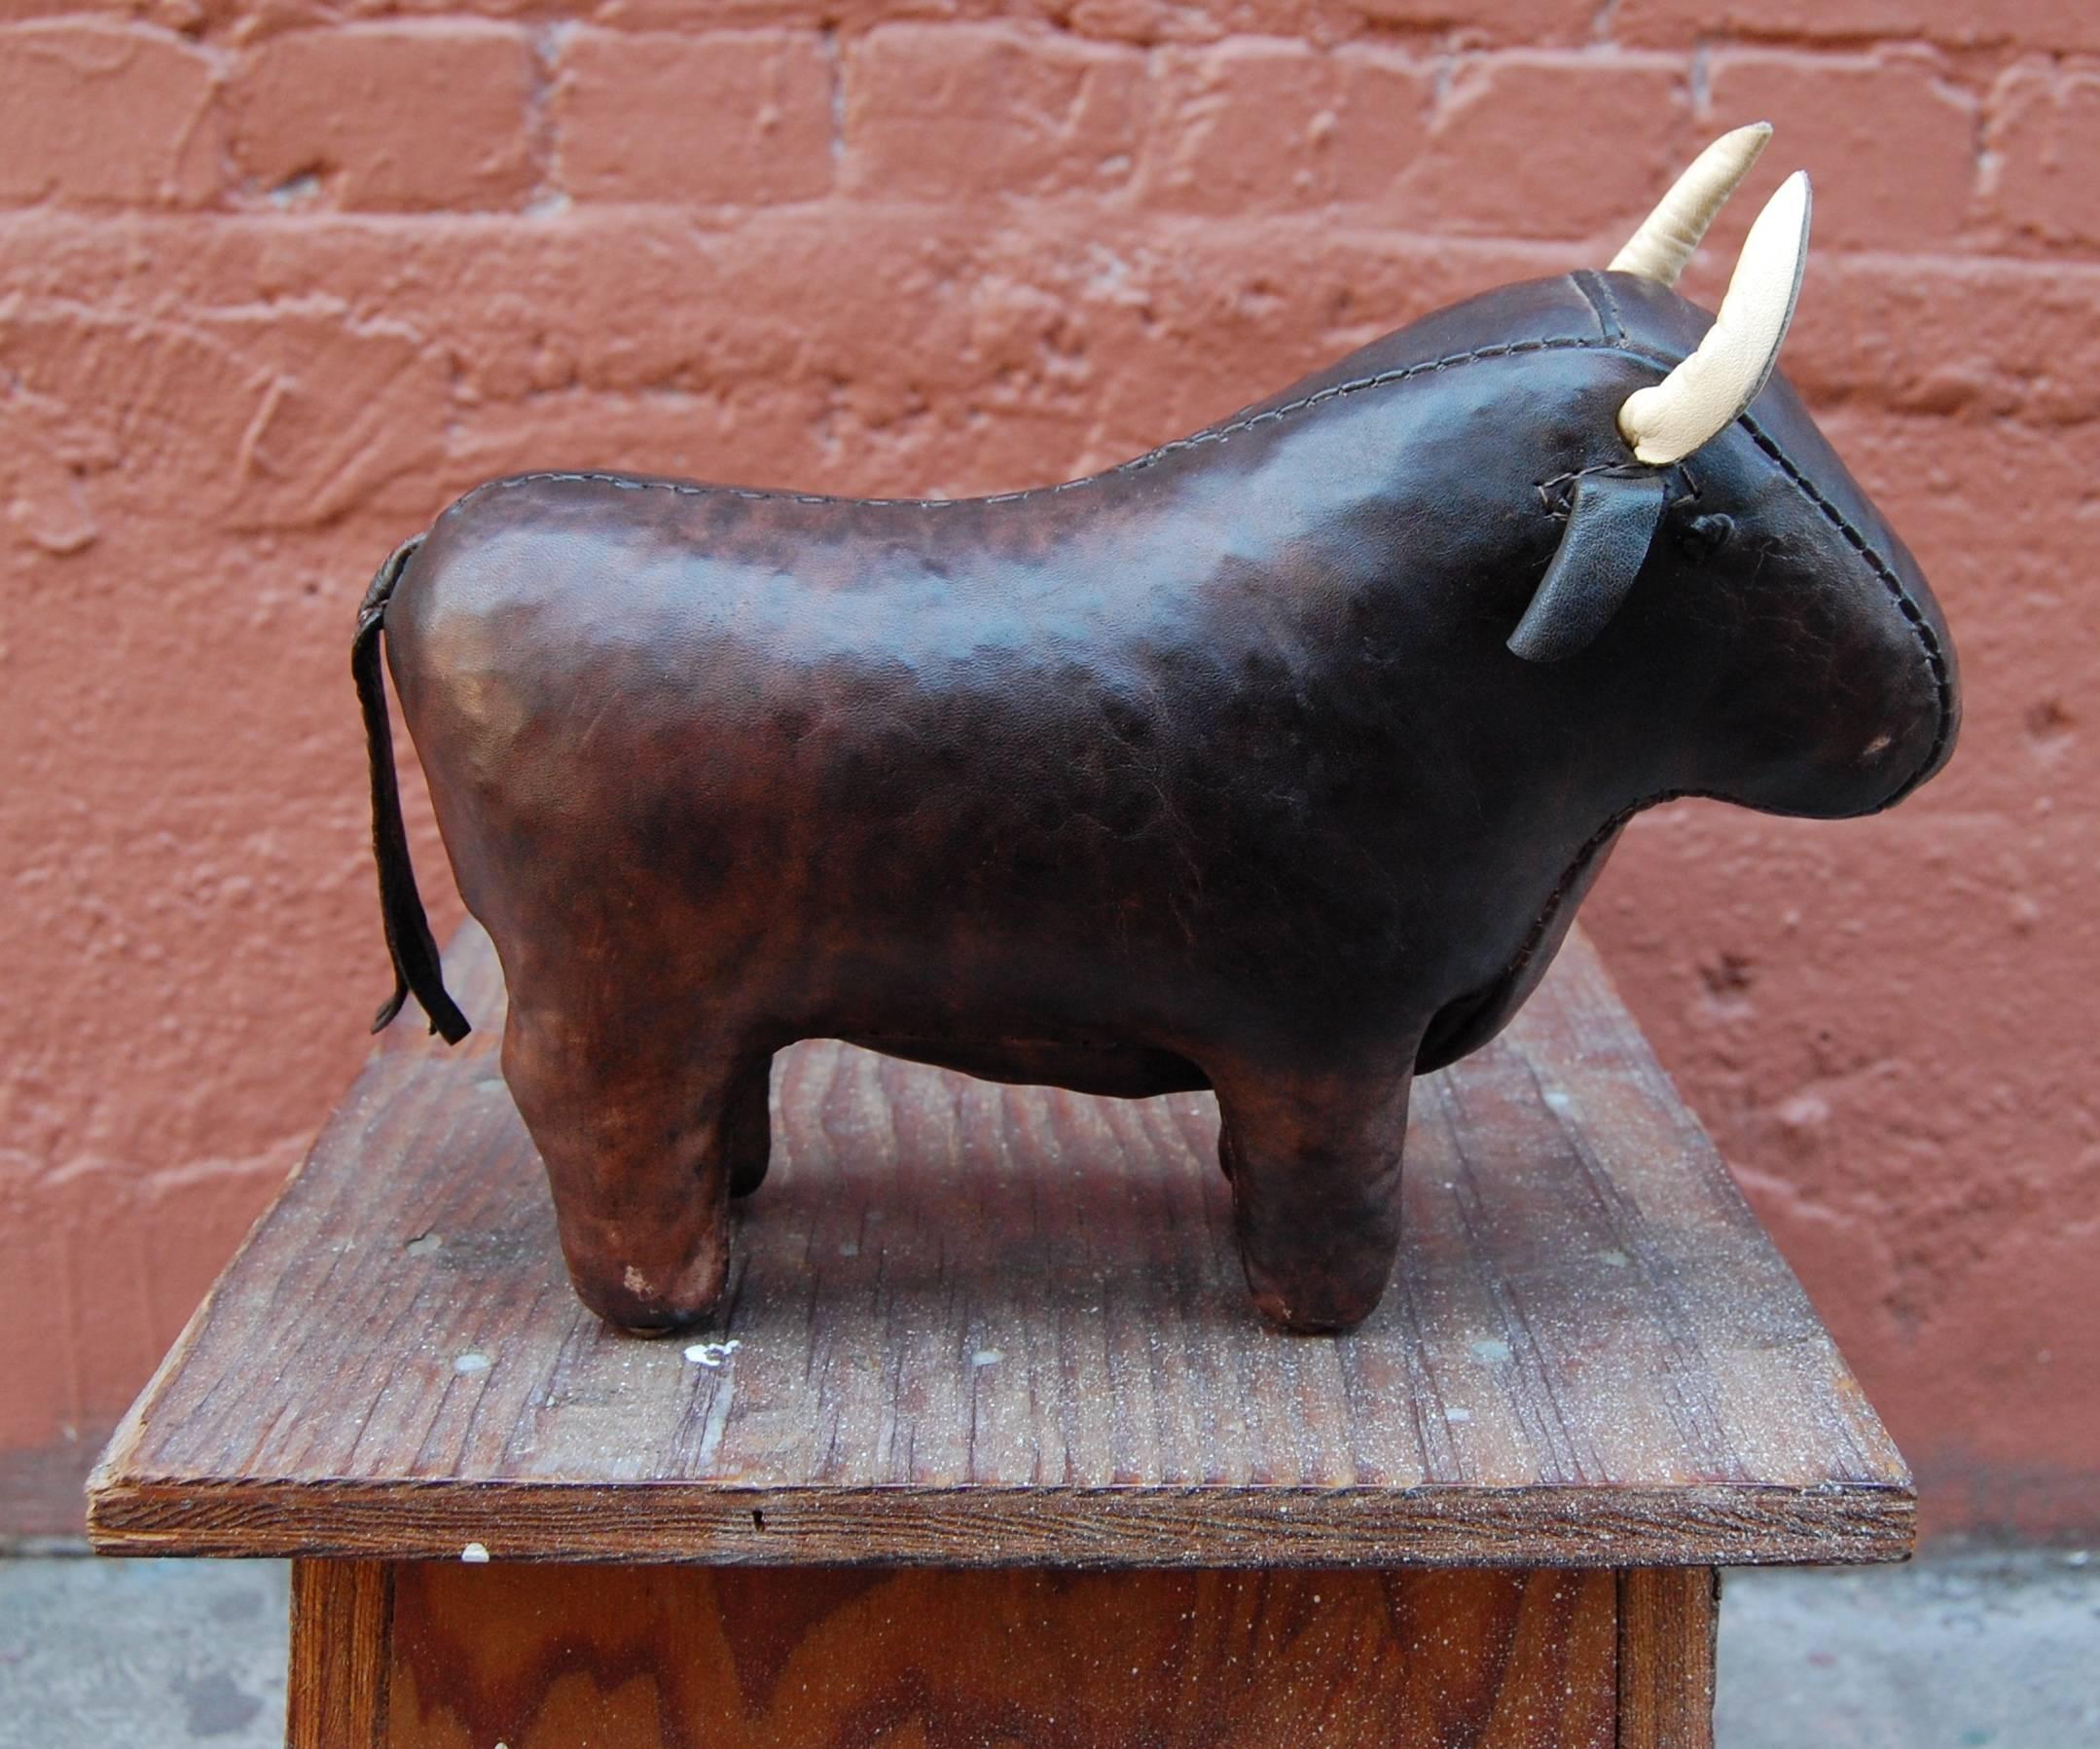 Miniature Omersa handmade leather bull salesman display sample from the 1960s. Great patina to the leather with no damage or other issues. These are fairly rare as only a small number were produced and given to their sales reps to show clients the